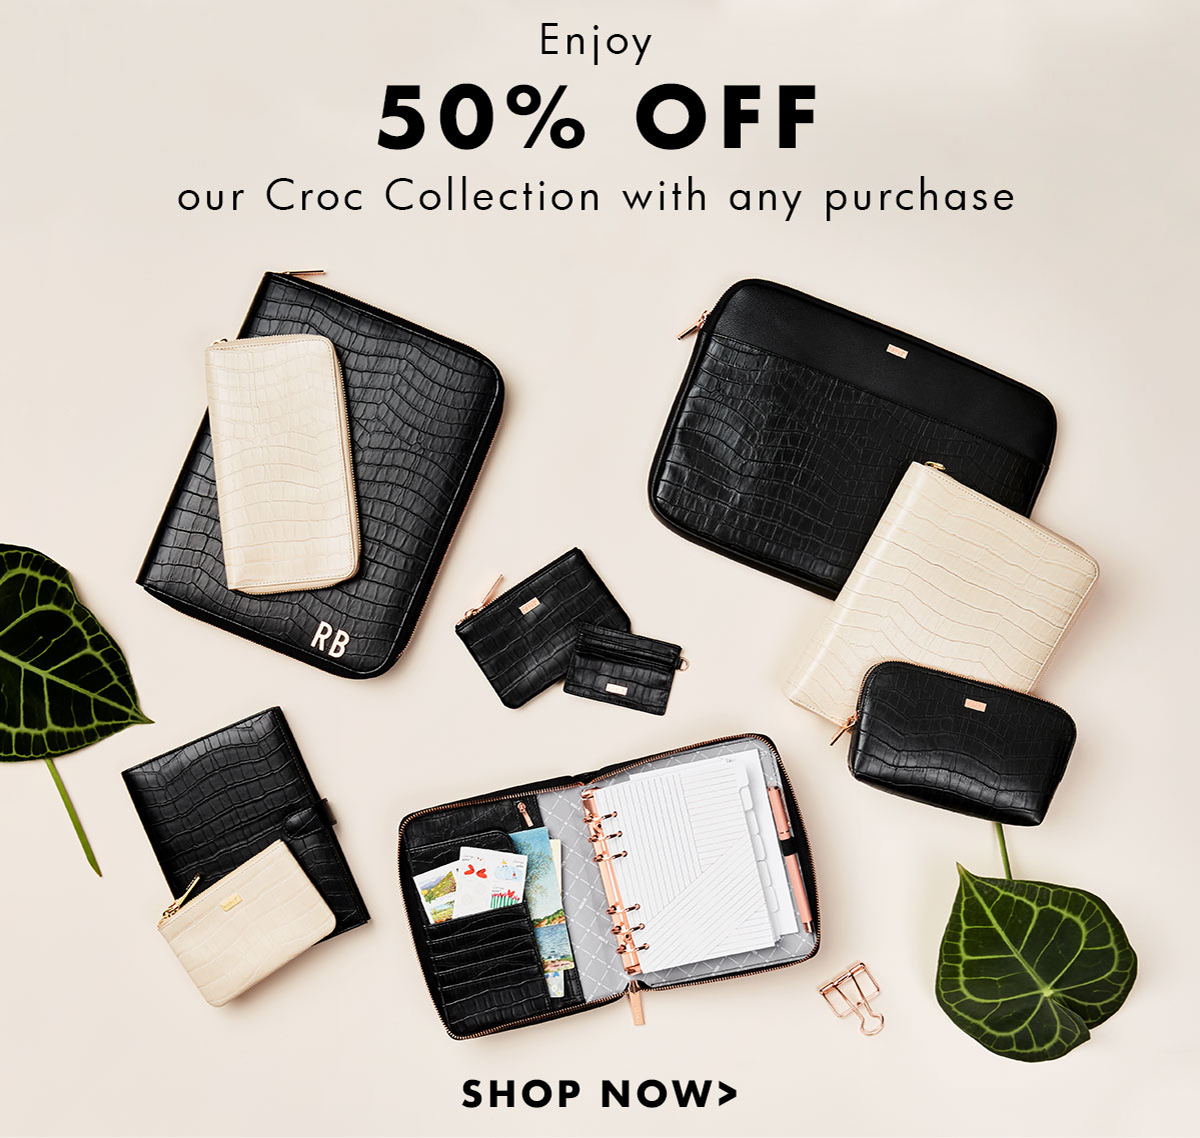 With any purchase enjoy 50% off any item from our Croc Collection. Shop now. 